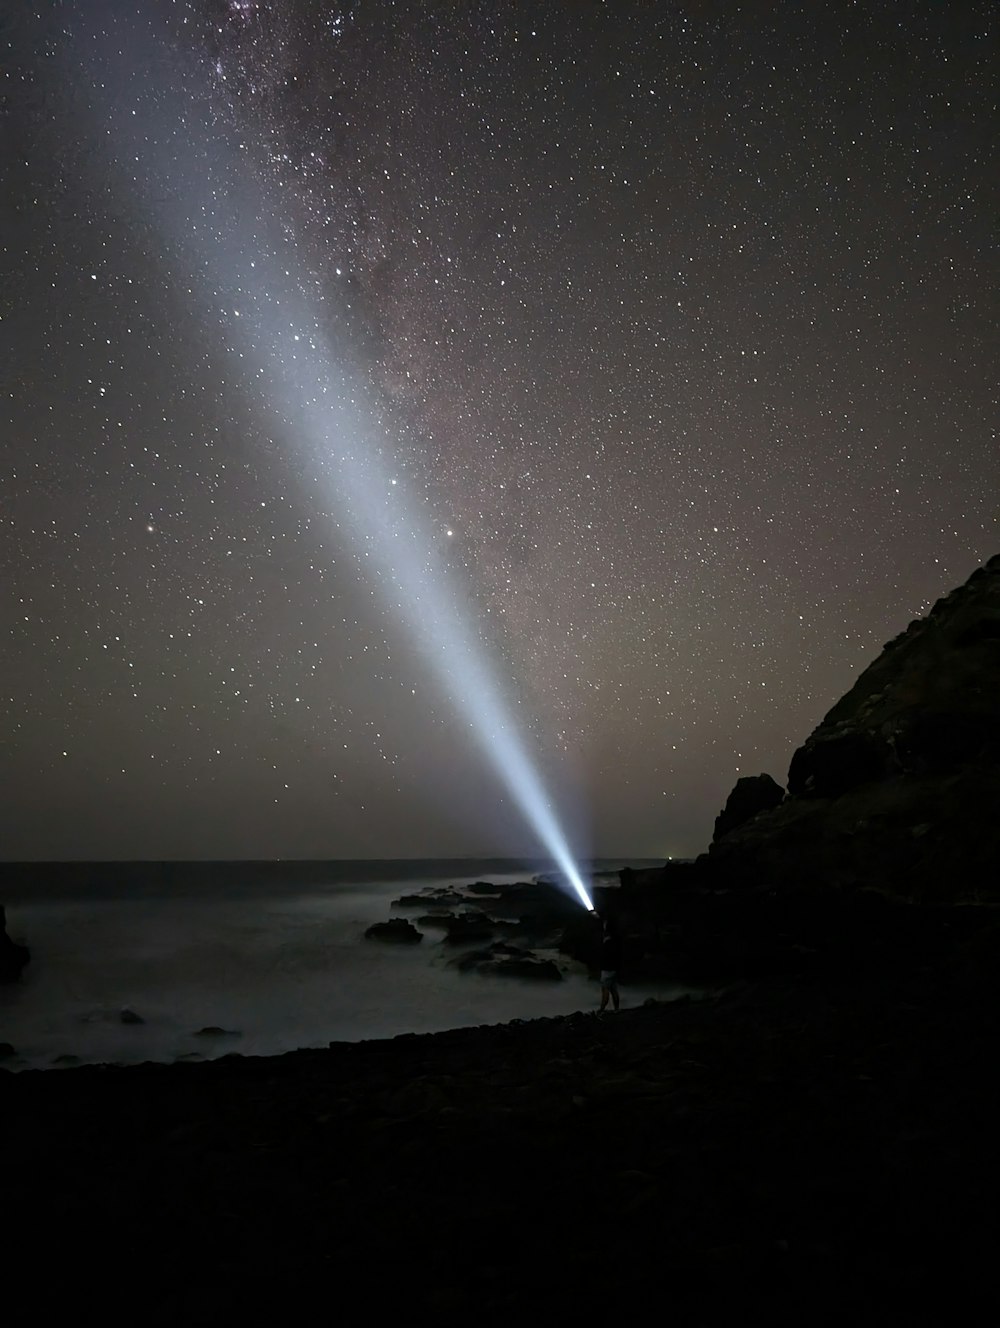 a bright beam of light shines in the night sky over the ocean